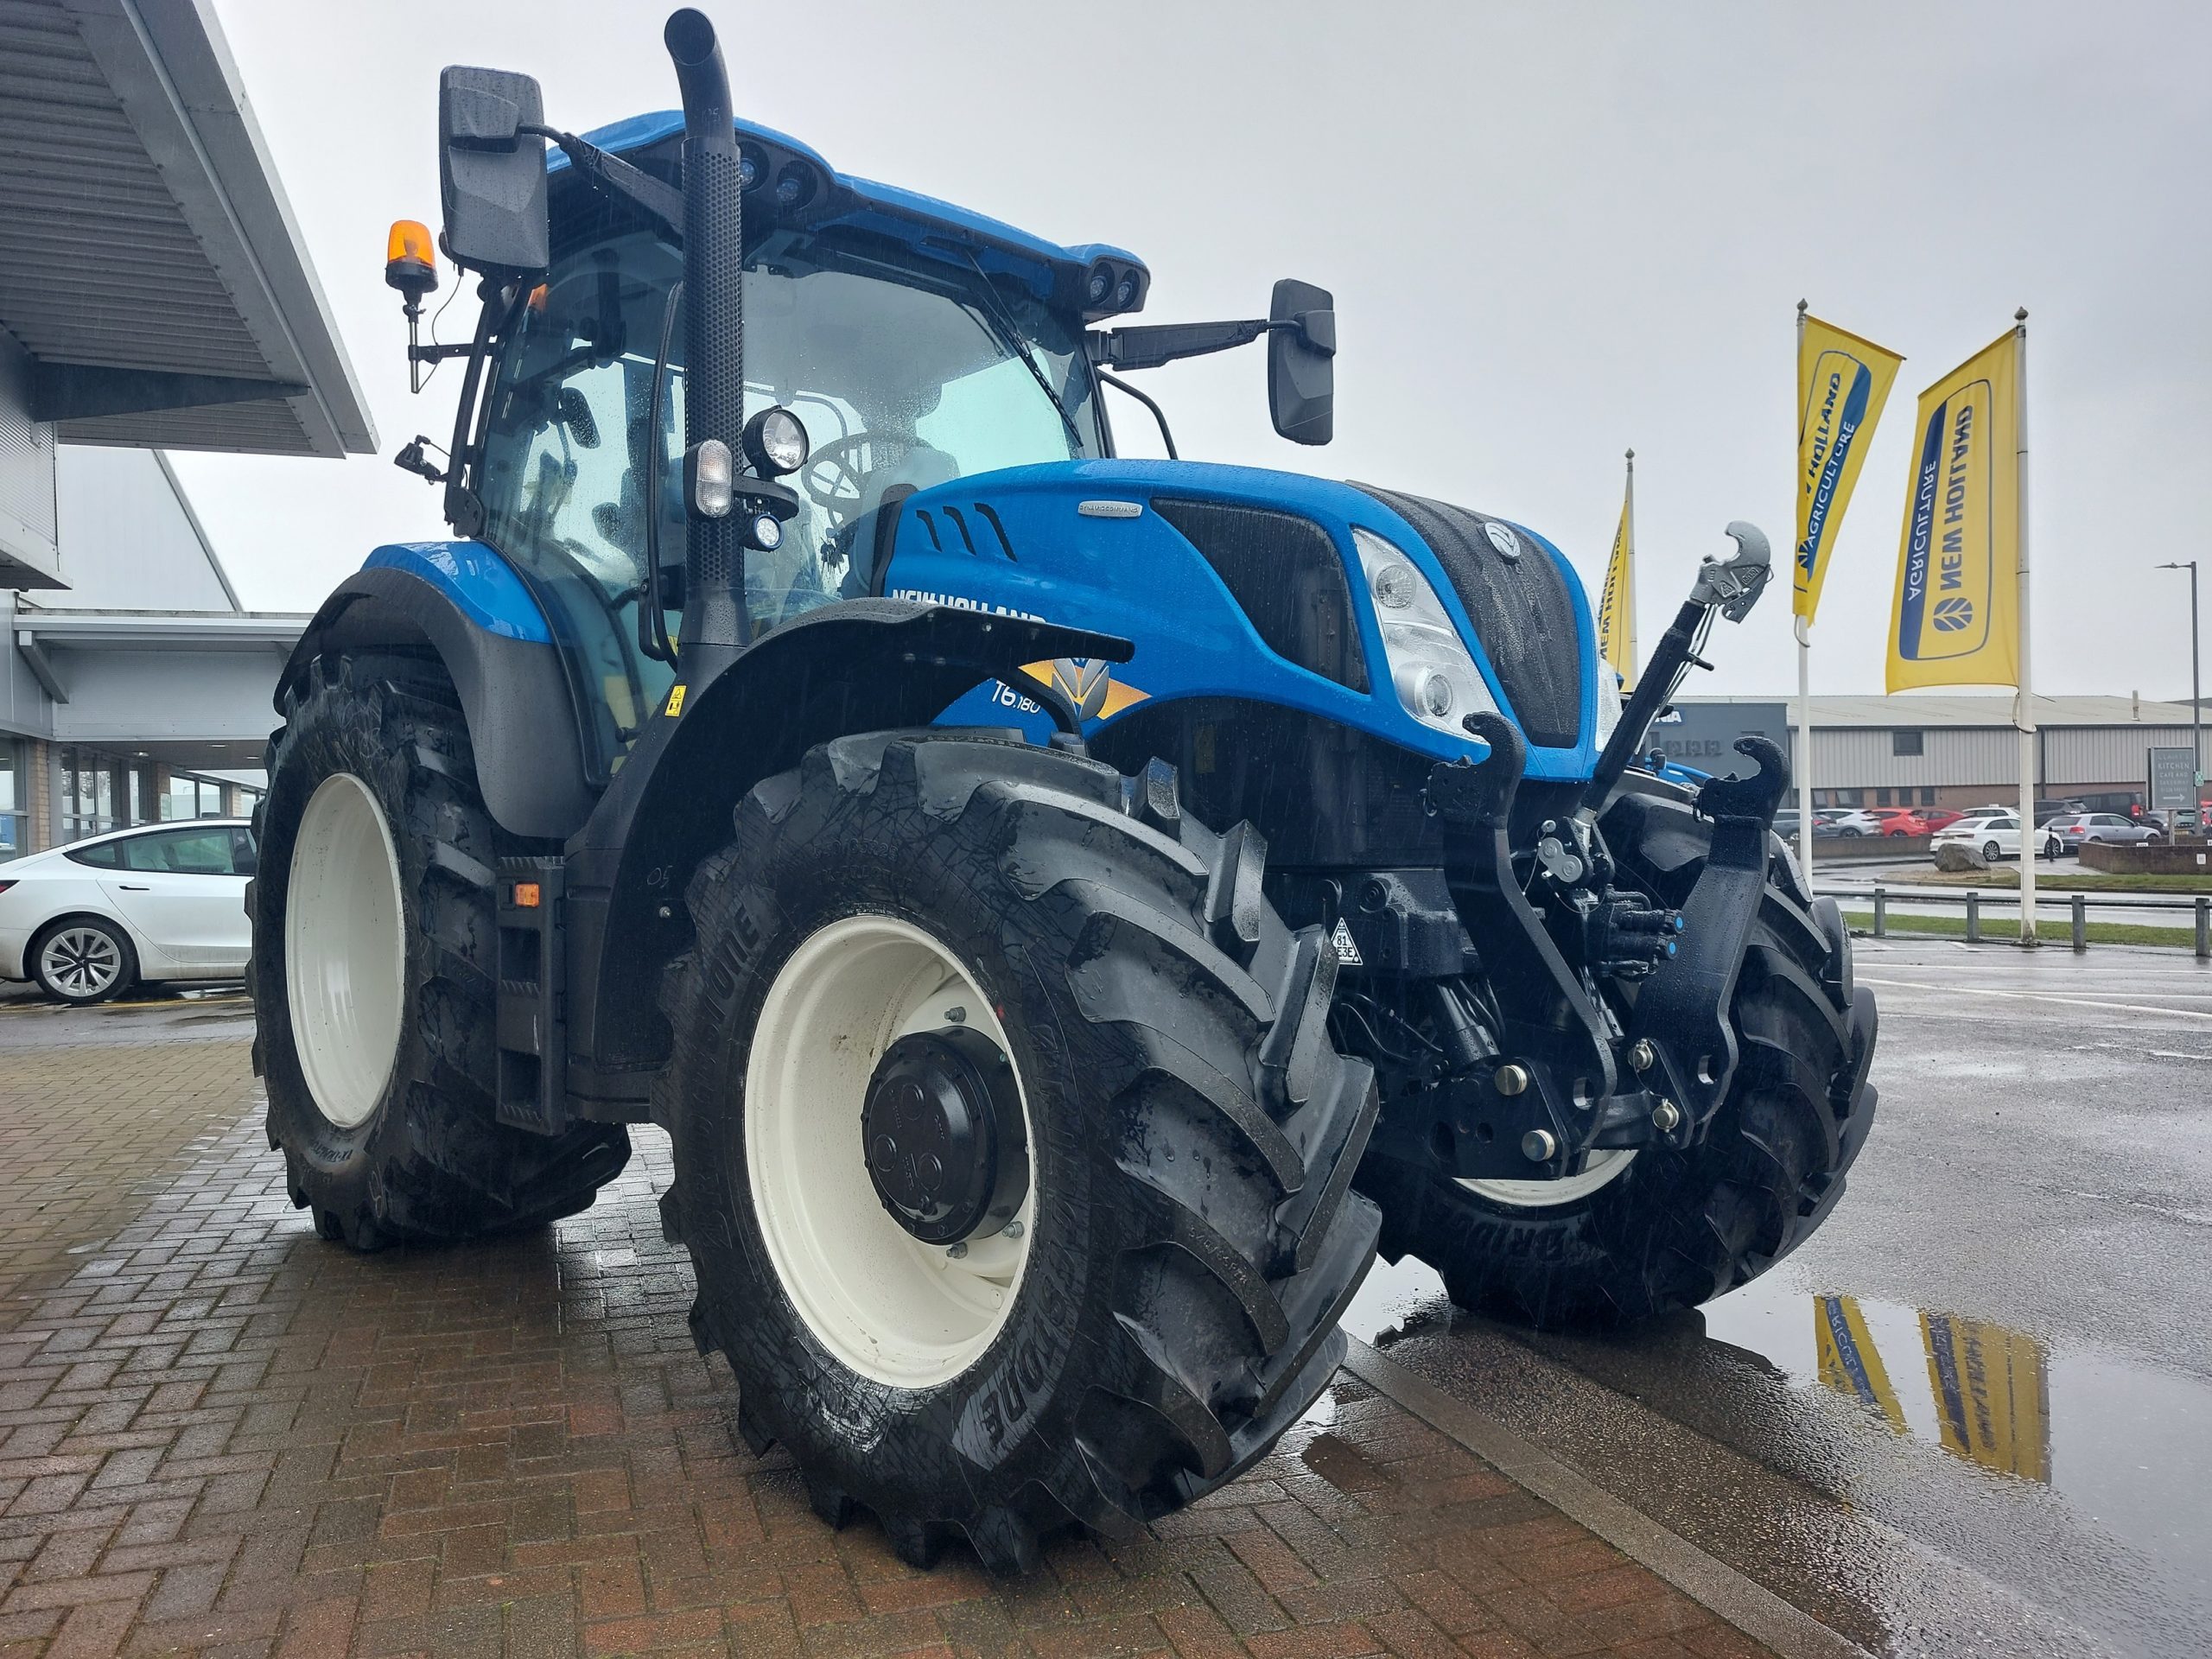 Bridgestone supplies its agricultural tyres into New Holland